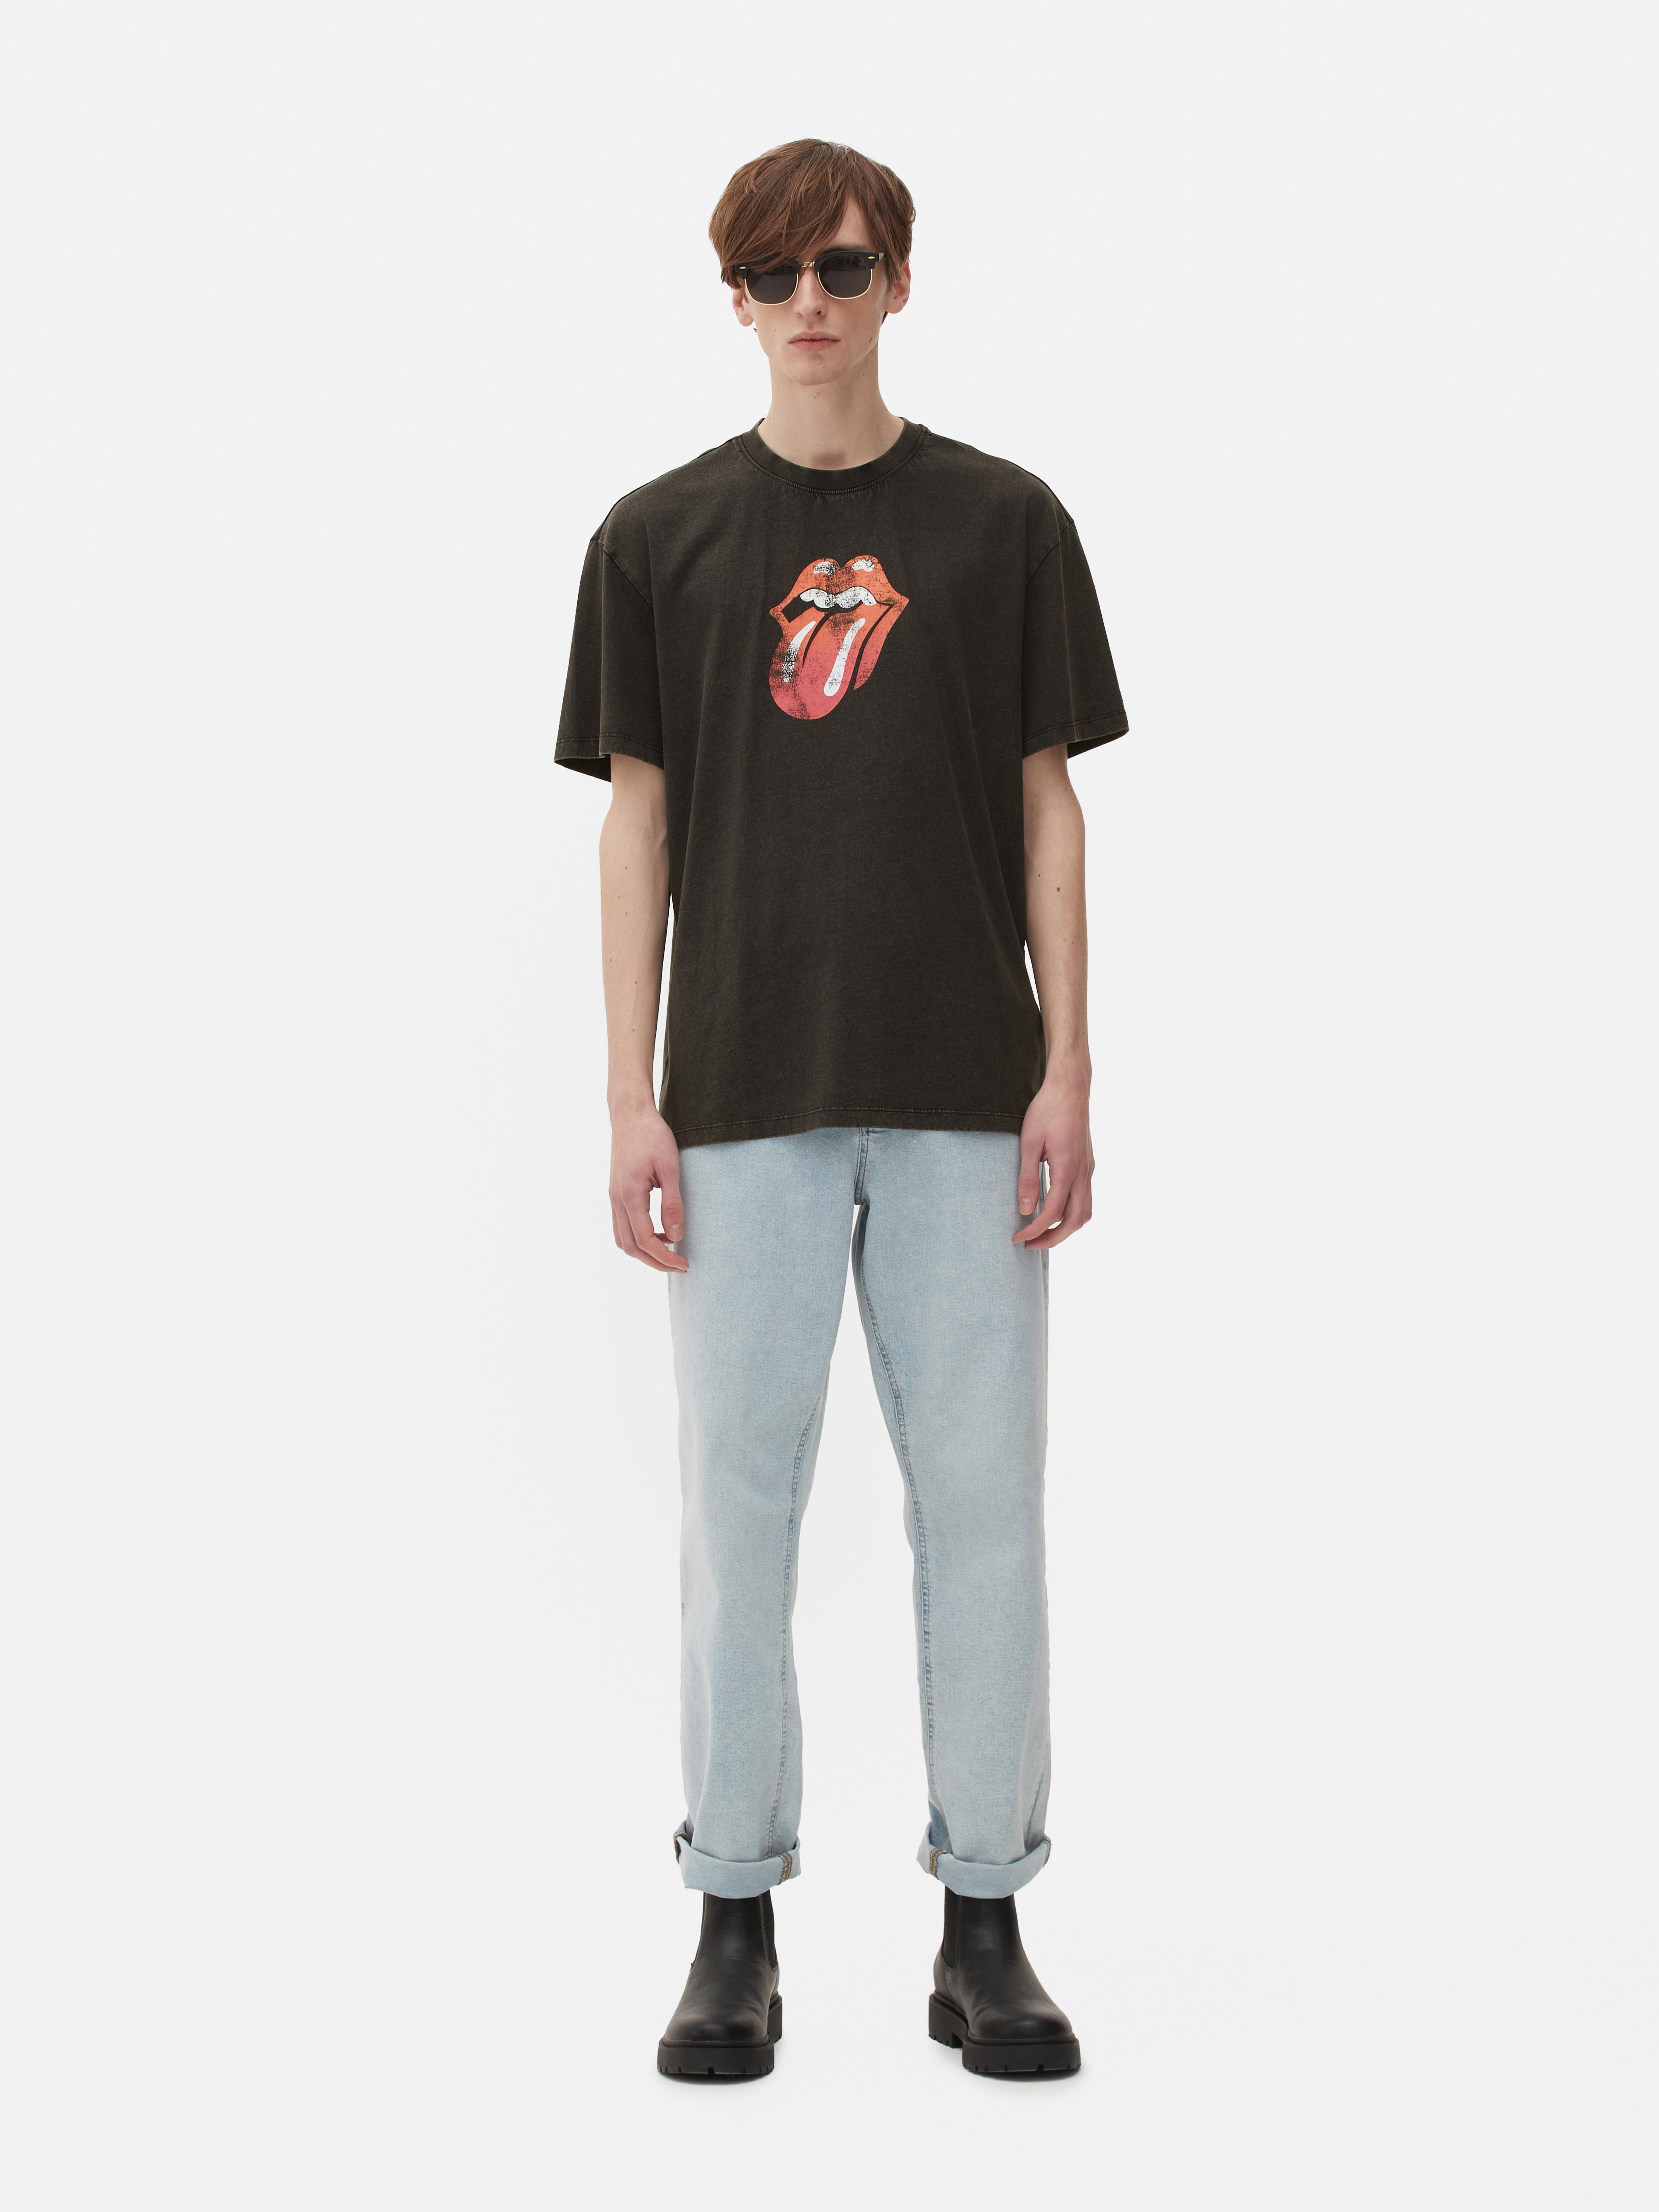 T-shirt style vintage Rolling Stones